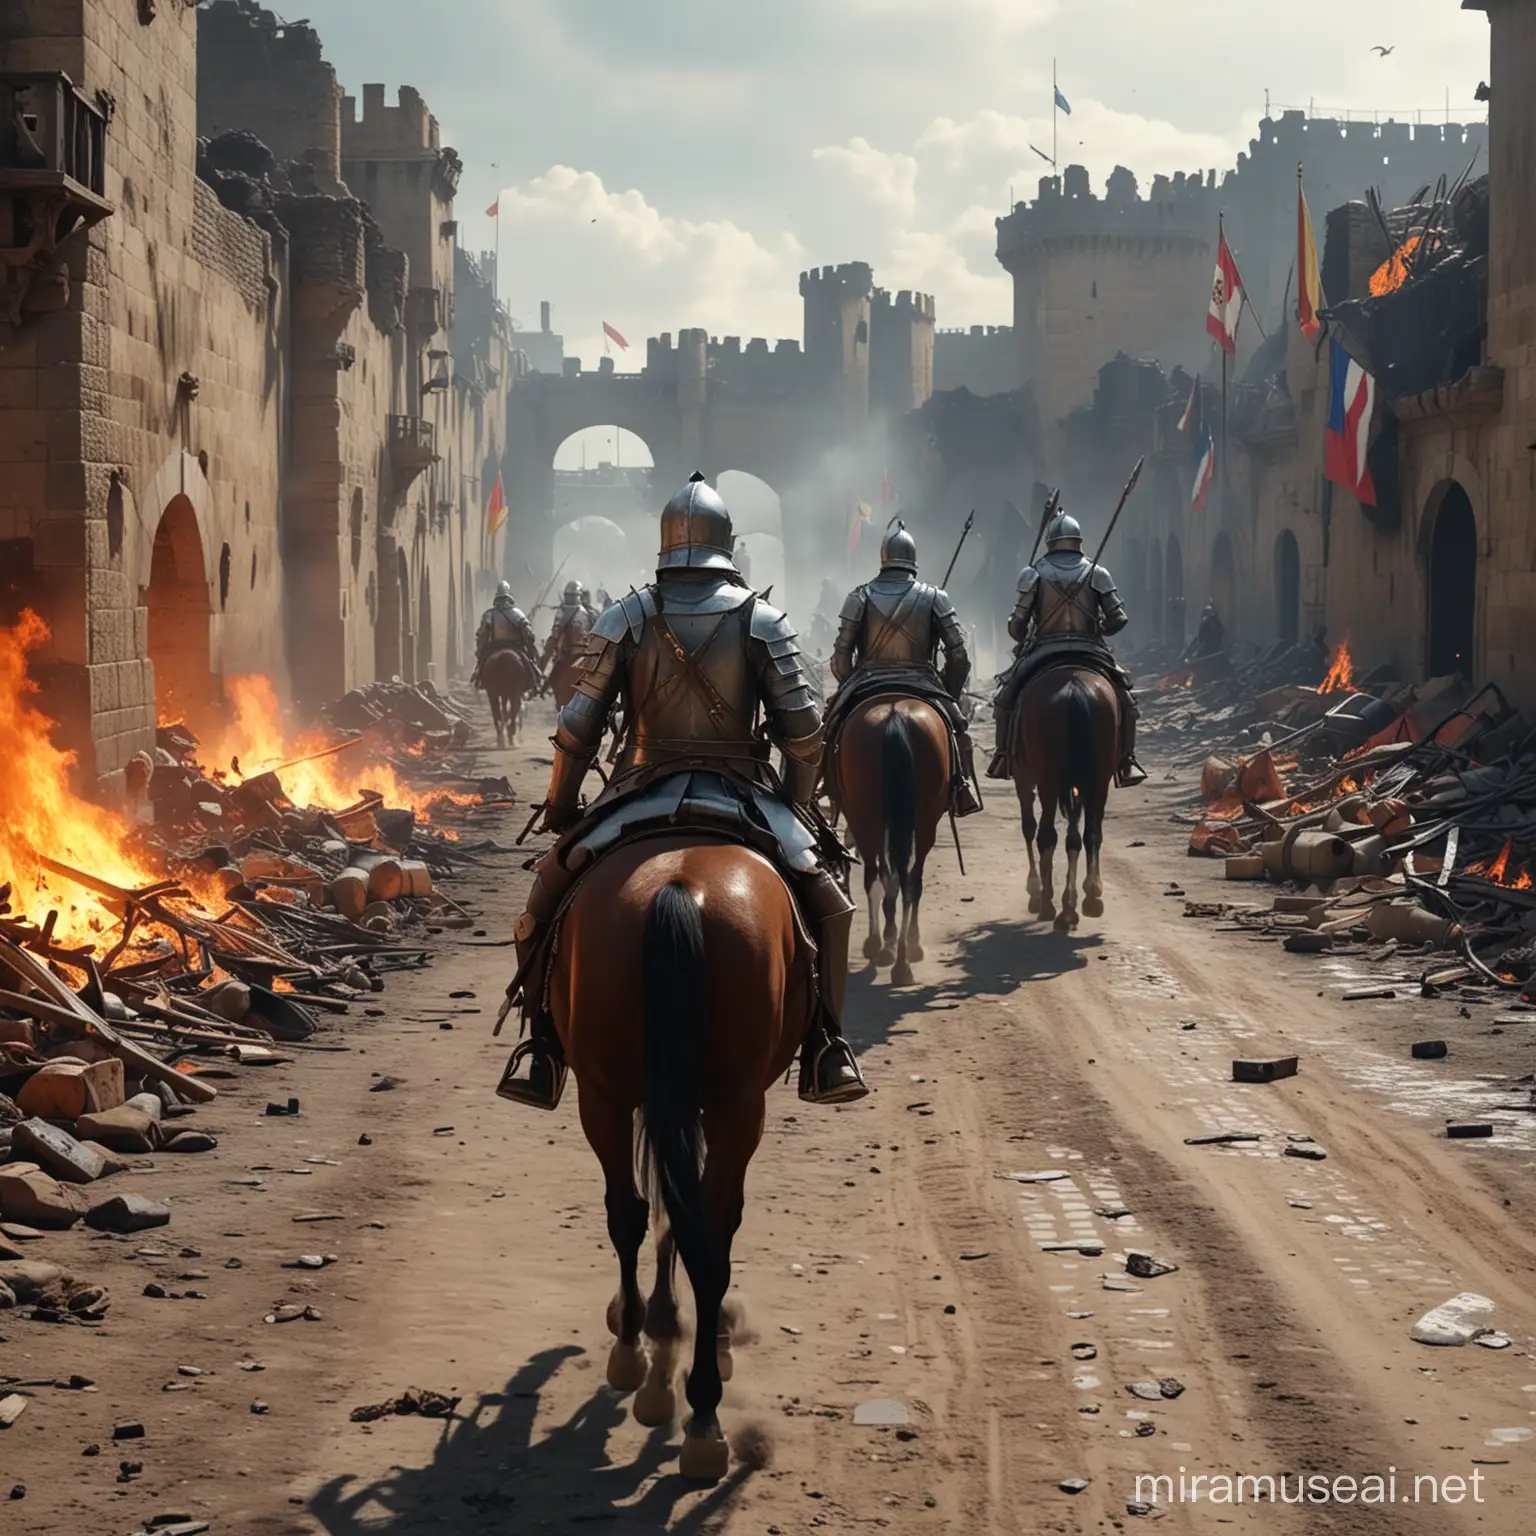 MAKE SPANISH KNIGHTS THAT ARE WALKING THRU THE BATLE GRAUND THATS DESTROYED AND AT FIRE, WITH A LOT OF DEAD SPANISH FRENCH SOLDERS AND HORSES,THEY ALL ARE IN A  FRENCH FORT, IN A PLAIN,A LOT OF FIRE AND DESTRUCTION, 4K PHOTO, ULTRAREALISTIC, THE CAMERA IS IN THE SKY, MEDIAVAL ERA